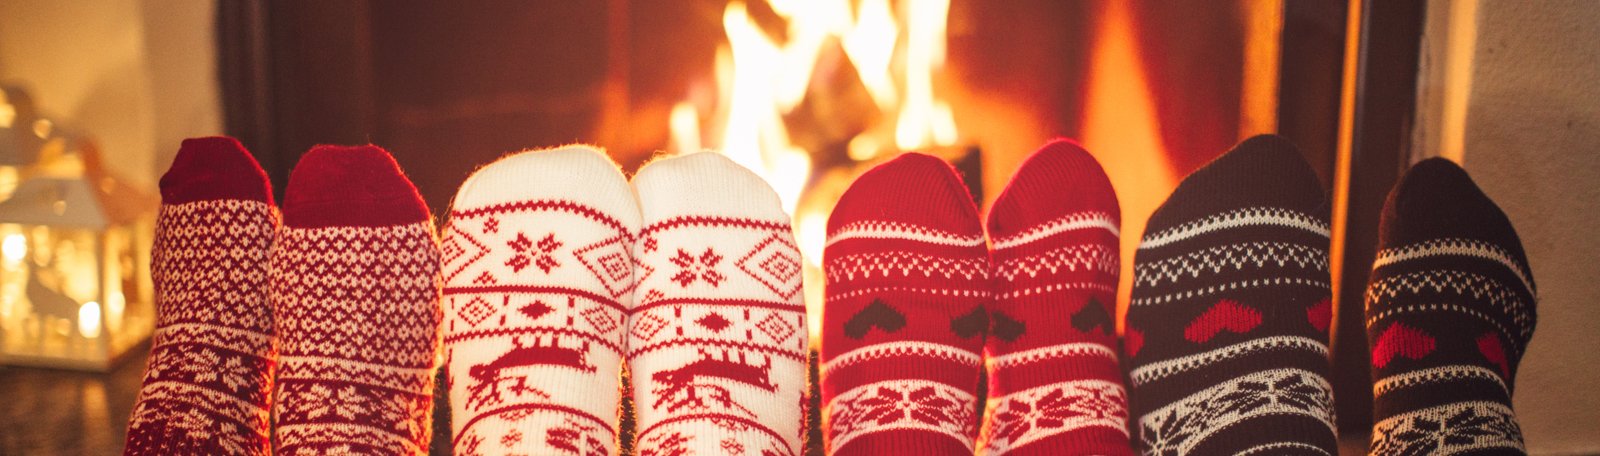 6 ways to get your house ready for winter